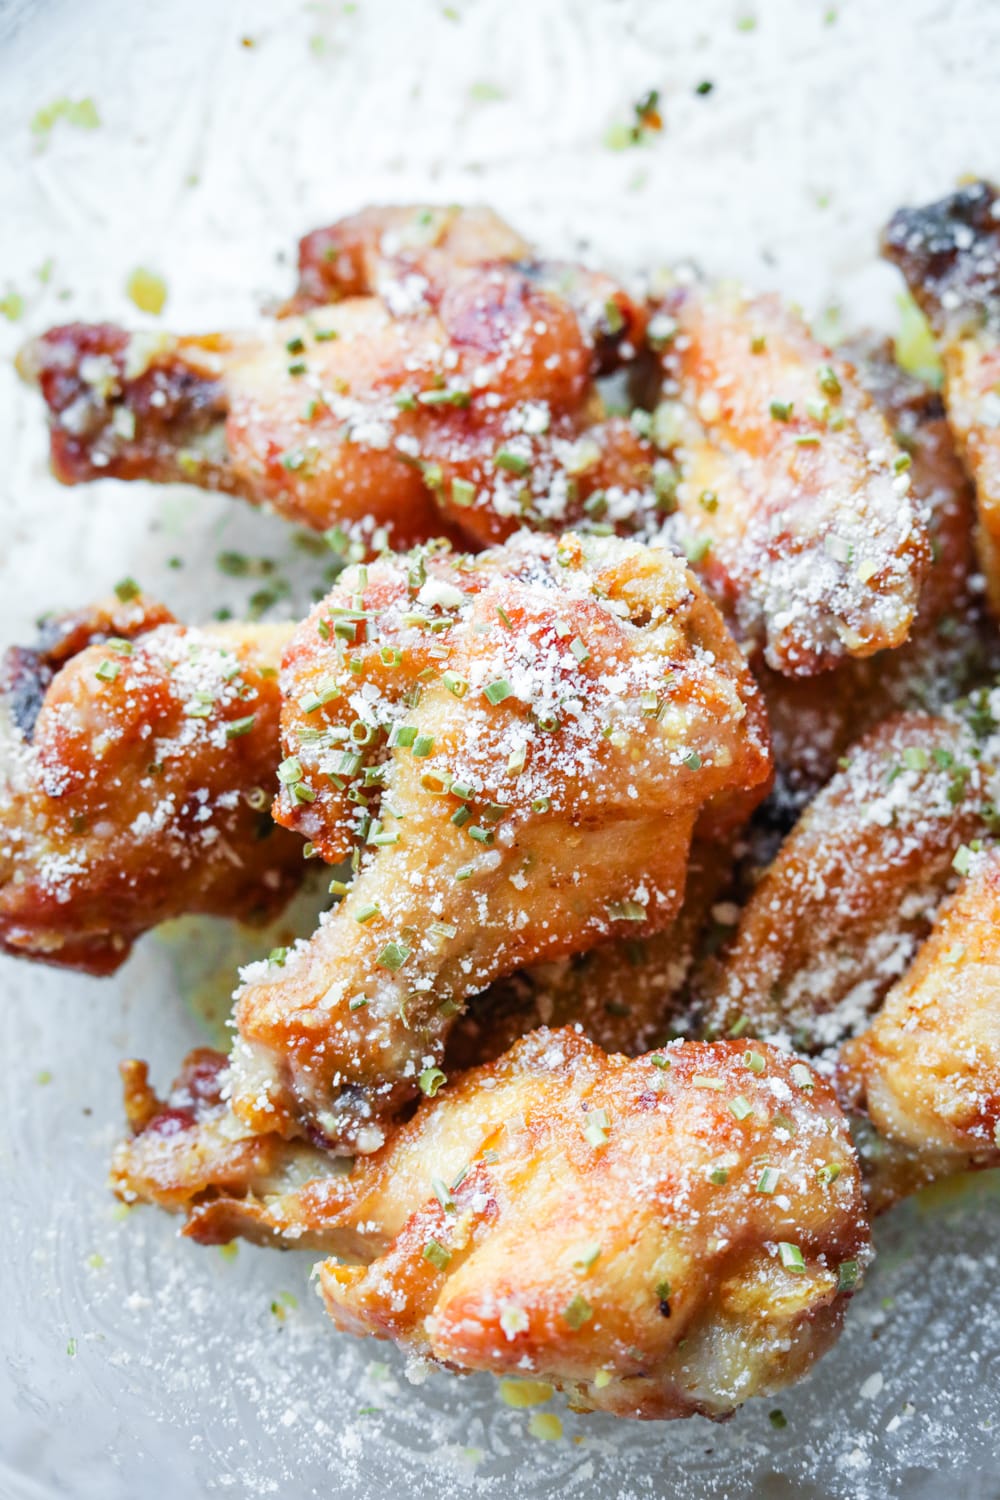 Garlic parmesan chicken wings being sauced in a bowl.